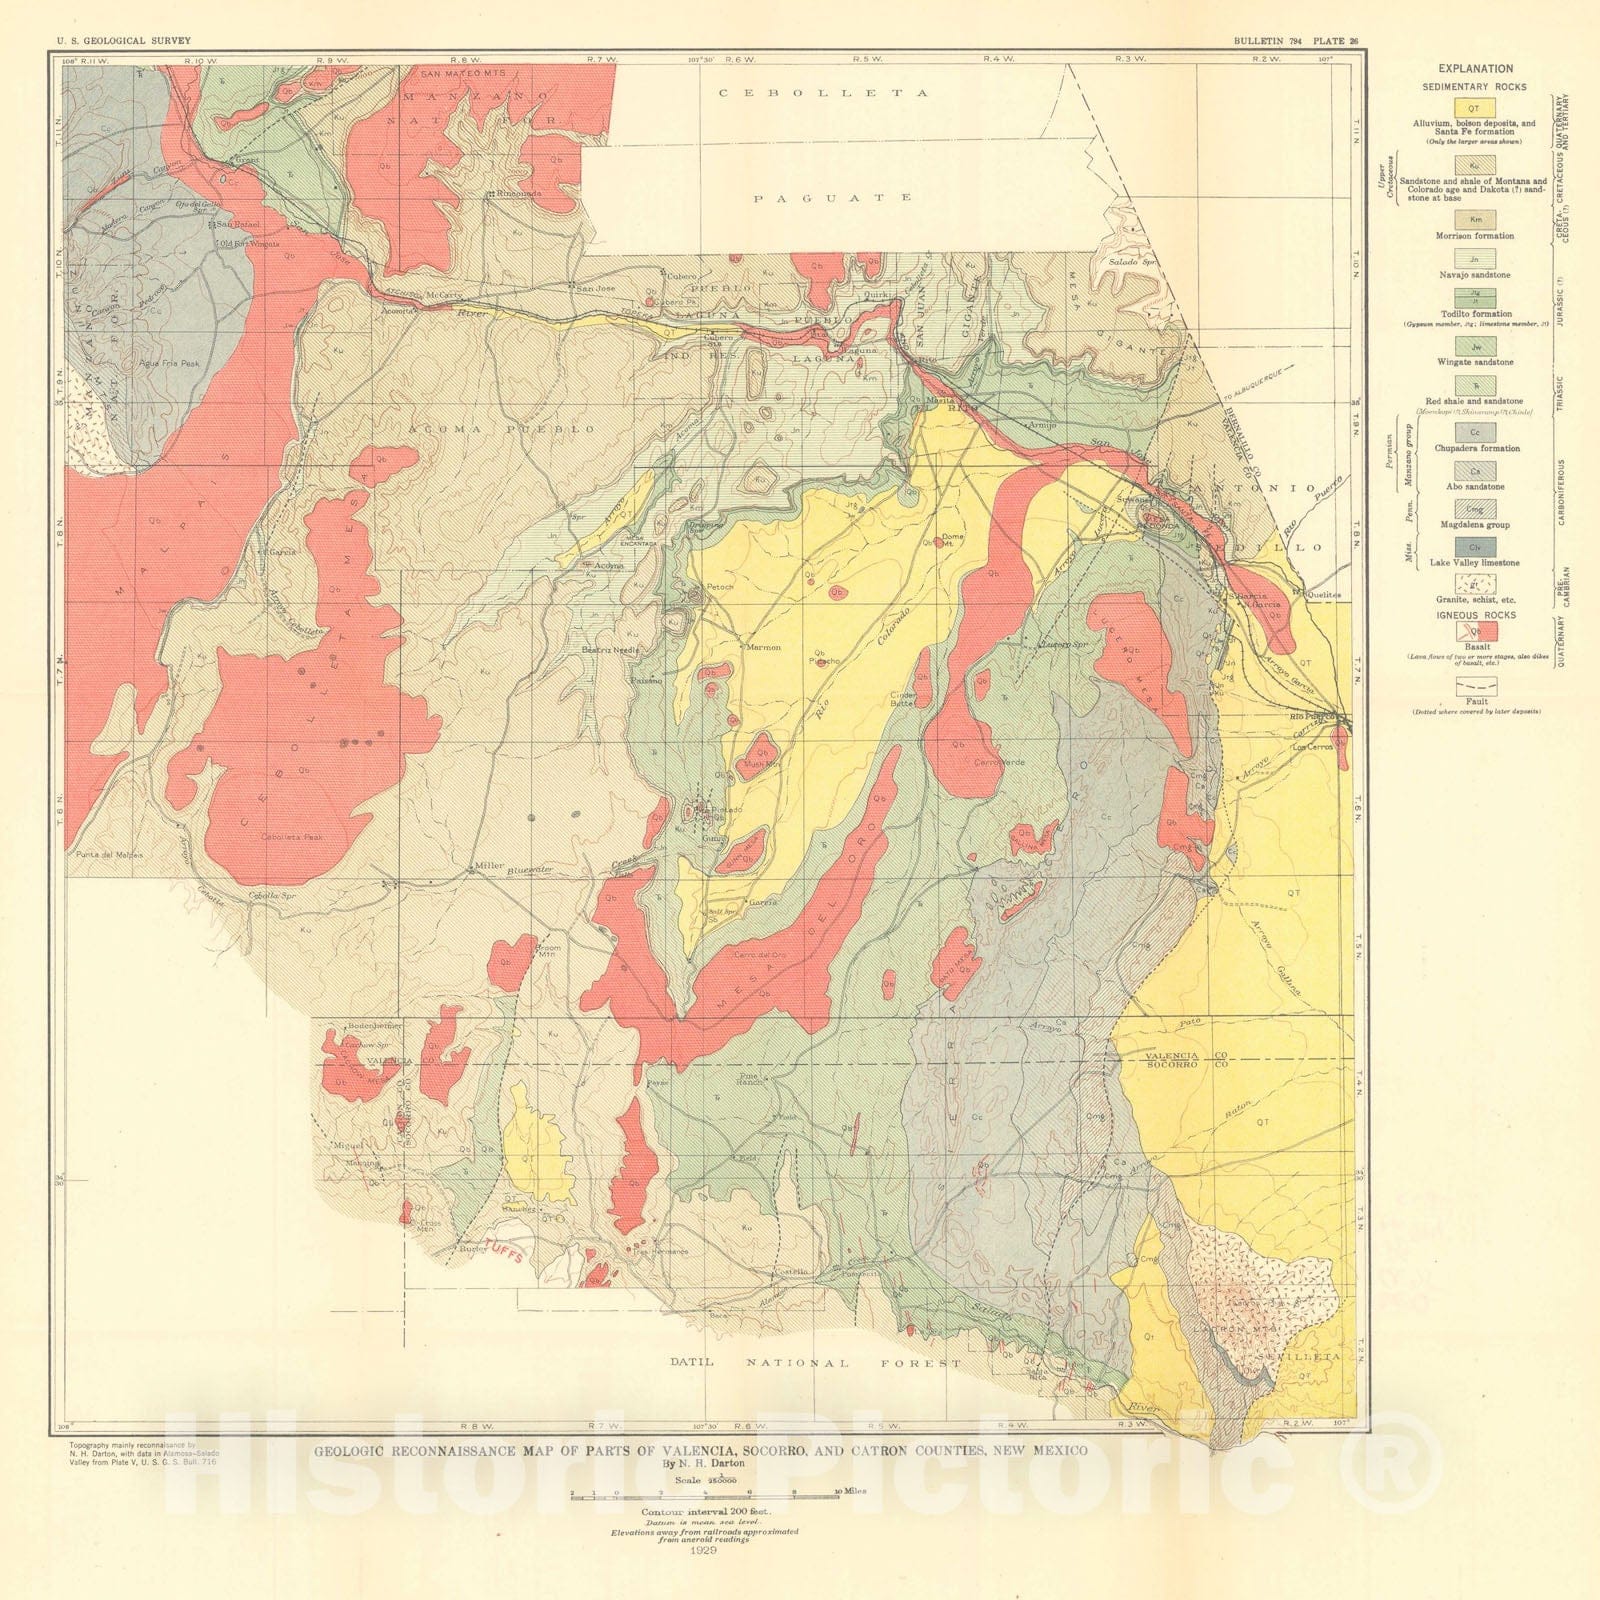 Map : Red beds and associated formations in New Mexico, with an outline of the geology of the state [parts of Valencia, Socorro, and Catron Counties, pl.26], 1928 Cartography Wall Art :